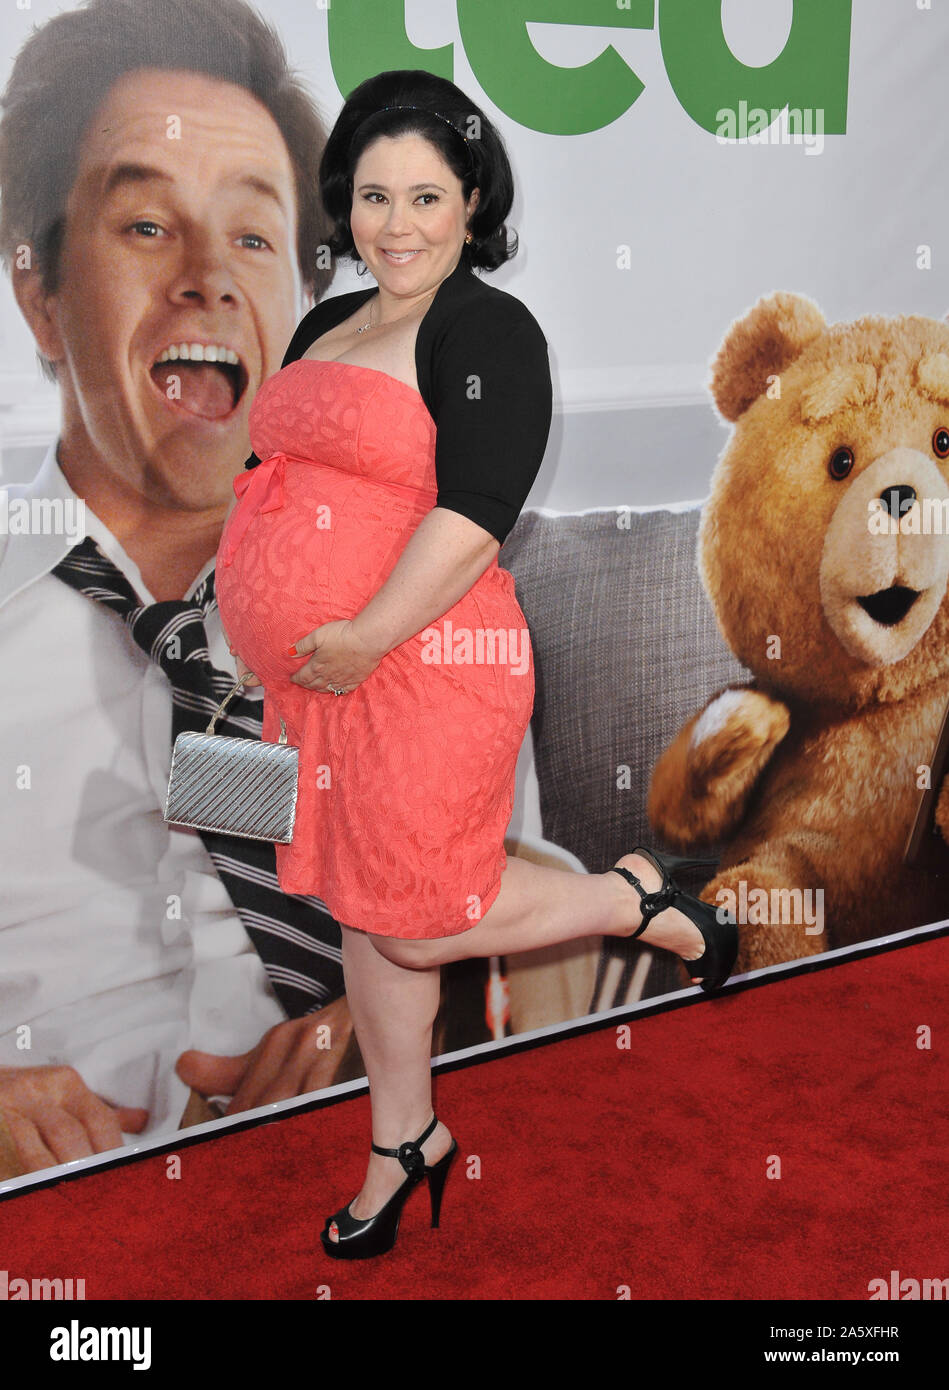 LOS ANGELES, CA. June 21, 2012: Alex Borstein at the world premiere of her  movie "Ted" at Grauman's Chinese Theatre, Hollywood. © 2012 Paul Smith /  Featureflash Stock Photo - Alamy